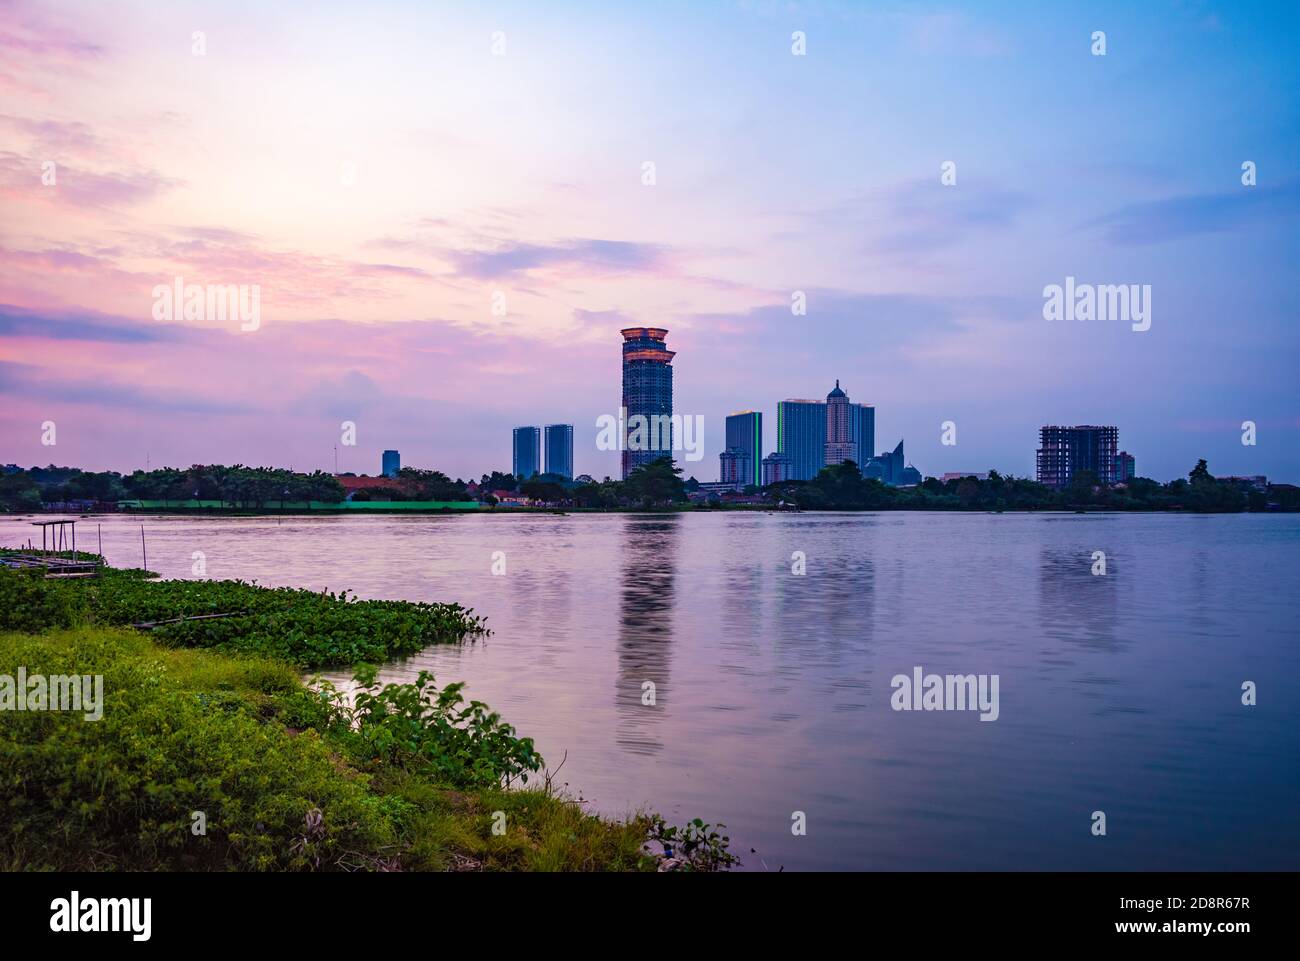 Tangerang, Indonesia - 14th April 2019: A view of Kelapa Dua Lake in the foreground and Lippo Karawaci district buildings in the background. Taken in Stock Photo